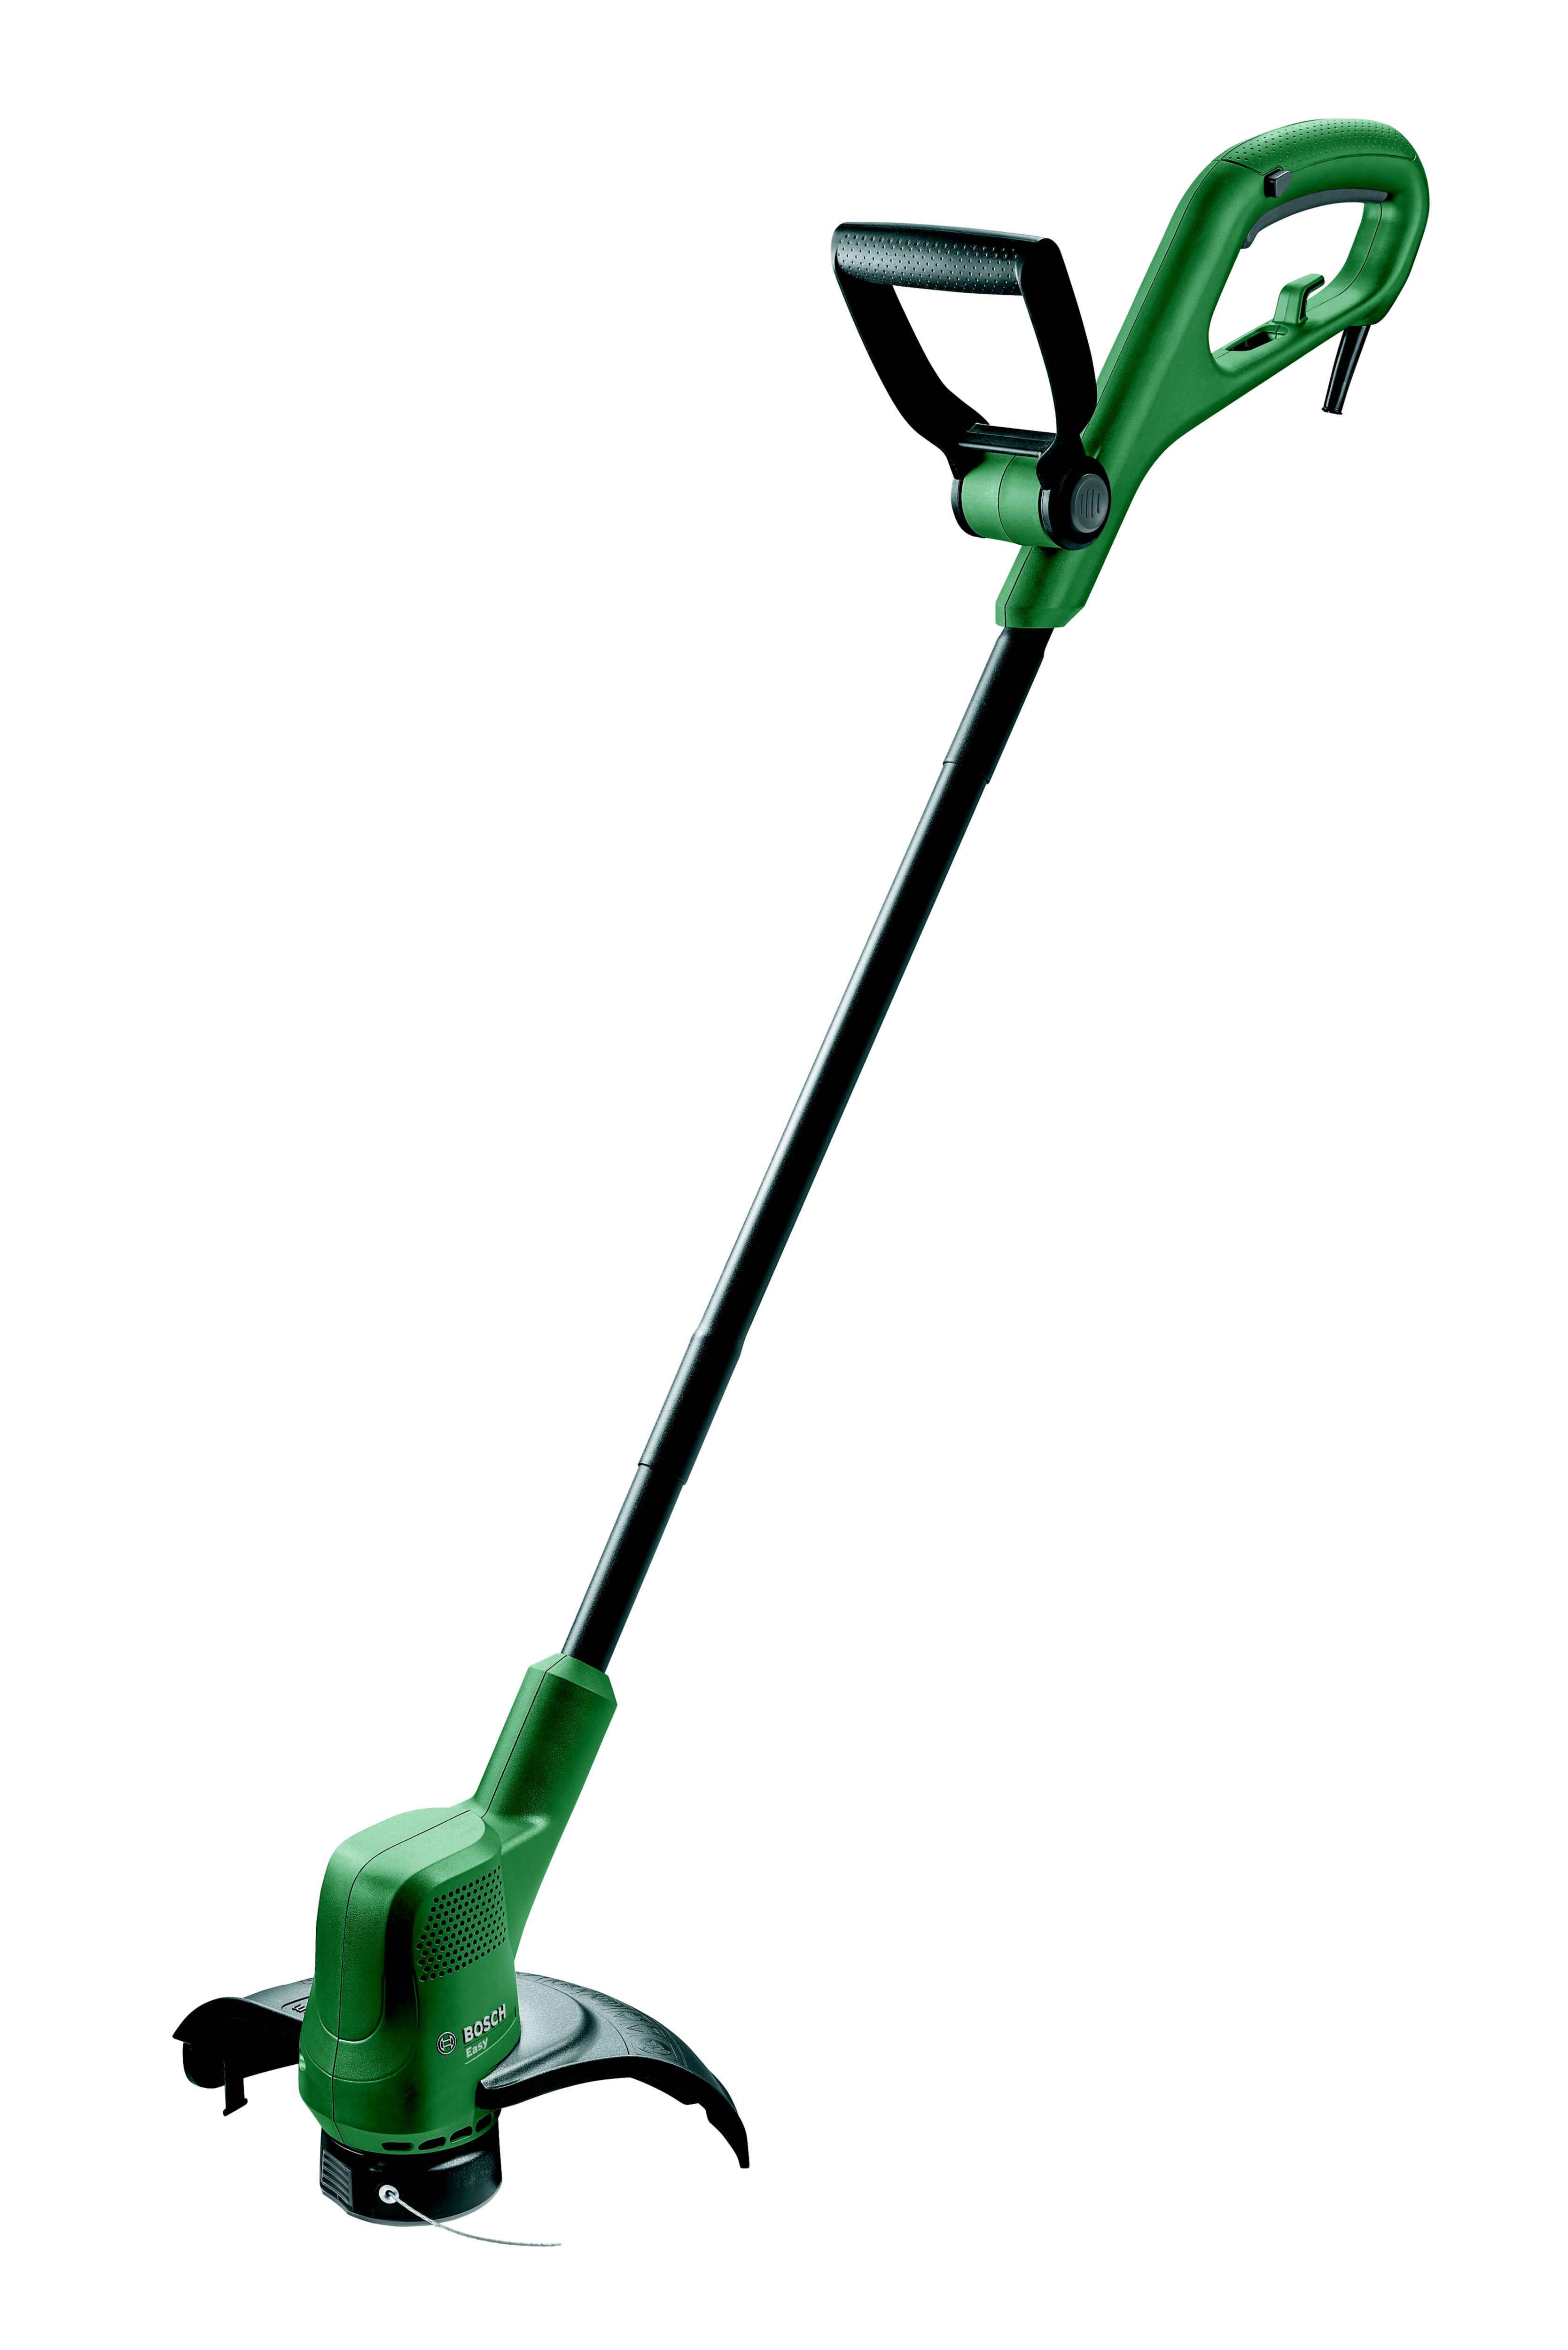 corded lawn trimmer